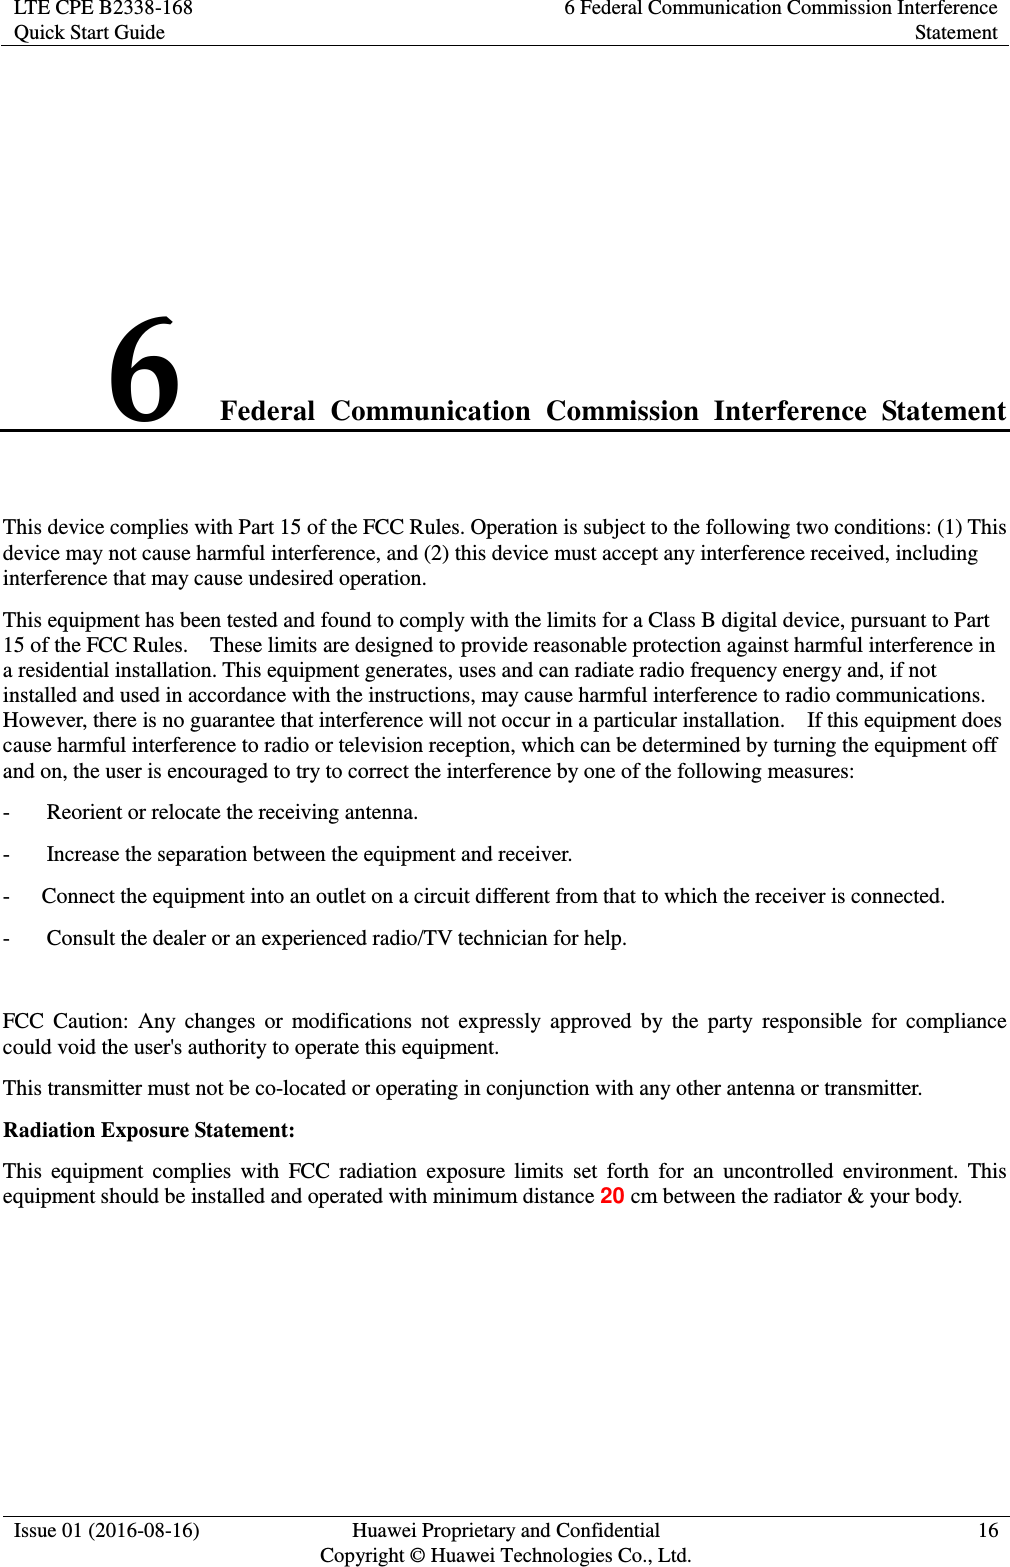 LTE CPE B2338-168 Quick Start Guide 6 Federal Communication Commission Interference Statement  Issue 01 (2016-08-16) Huawei Proprietary and Confidential         Copyright © Huawei Technologies Co., Ltd. 16   6 Federal  Communication  Commission  Interference  Statement This device complies with Part 15 of the FCC Rules. Operation is subject to the following two conditions: (1) This device may not cause harmful interference, and (2) this device must accept any interference received, including interference that may cause undesired operation. This equipment has been tested and found to comply with the limits for a Class B digital device, pursuant to Part 15 of the FCC Rules.    These limits are designed to provide reasonable protection against harmful interference in a residential installation. This equipment generates, uses and can radiate radio frequency energy and, if not installed and used in accordance with the instructions, may cause harmful interference to radio communications.   However, there is no guarantee that interference will not occur in a particular installation.    If this equipment does cause harmful interference to radio or television reception, which can be determined by turning the equipment off and on, the user is encouraged to try to correct the interference by one of the following measures: -  Reorient or relocate the receiving antenna. -  Increase the separation between the equipment and receiver. -  Connect the equipment into an outlet on a circuit different from that to which the receiver is connected. -  Consult the dealer or an experienced radio/TV technician for help.  FCC  Caution:  Any  changes  or  modifications  not  expressly  approved  by  the  party  responsible  for  compliance could void the user&apos;s authority to operate this equipment. This transmitter must not be co-located or operating in conjunction with any other antenna or transmitter. Radiation Exposure Statement: This  equipment  complies  with  FCC  radiation  exposure  limits  set  forth  for  an  uncontrolled  environment.  This equipment should be installed and operated with minimum distance 20 cm between the radiator &amp; your body.   